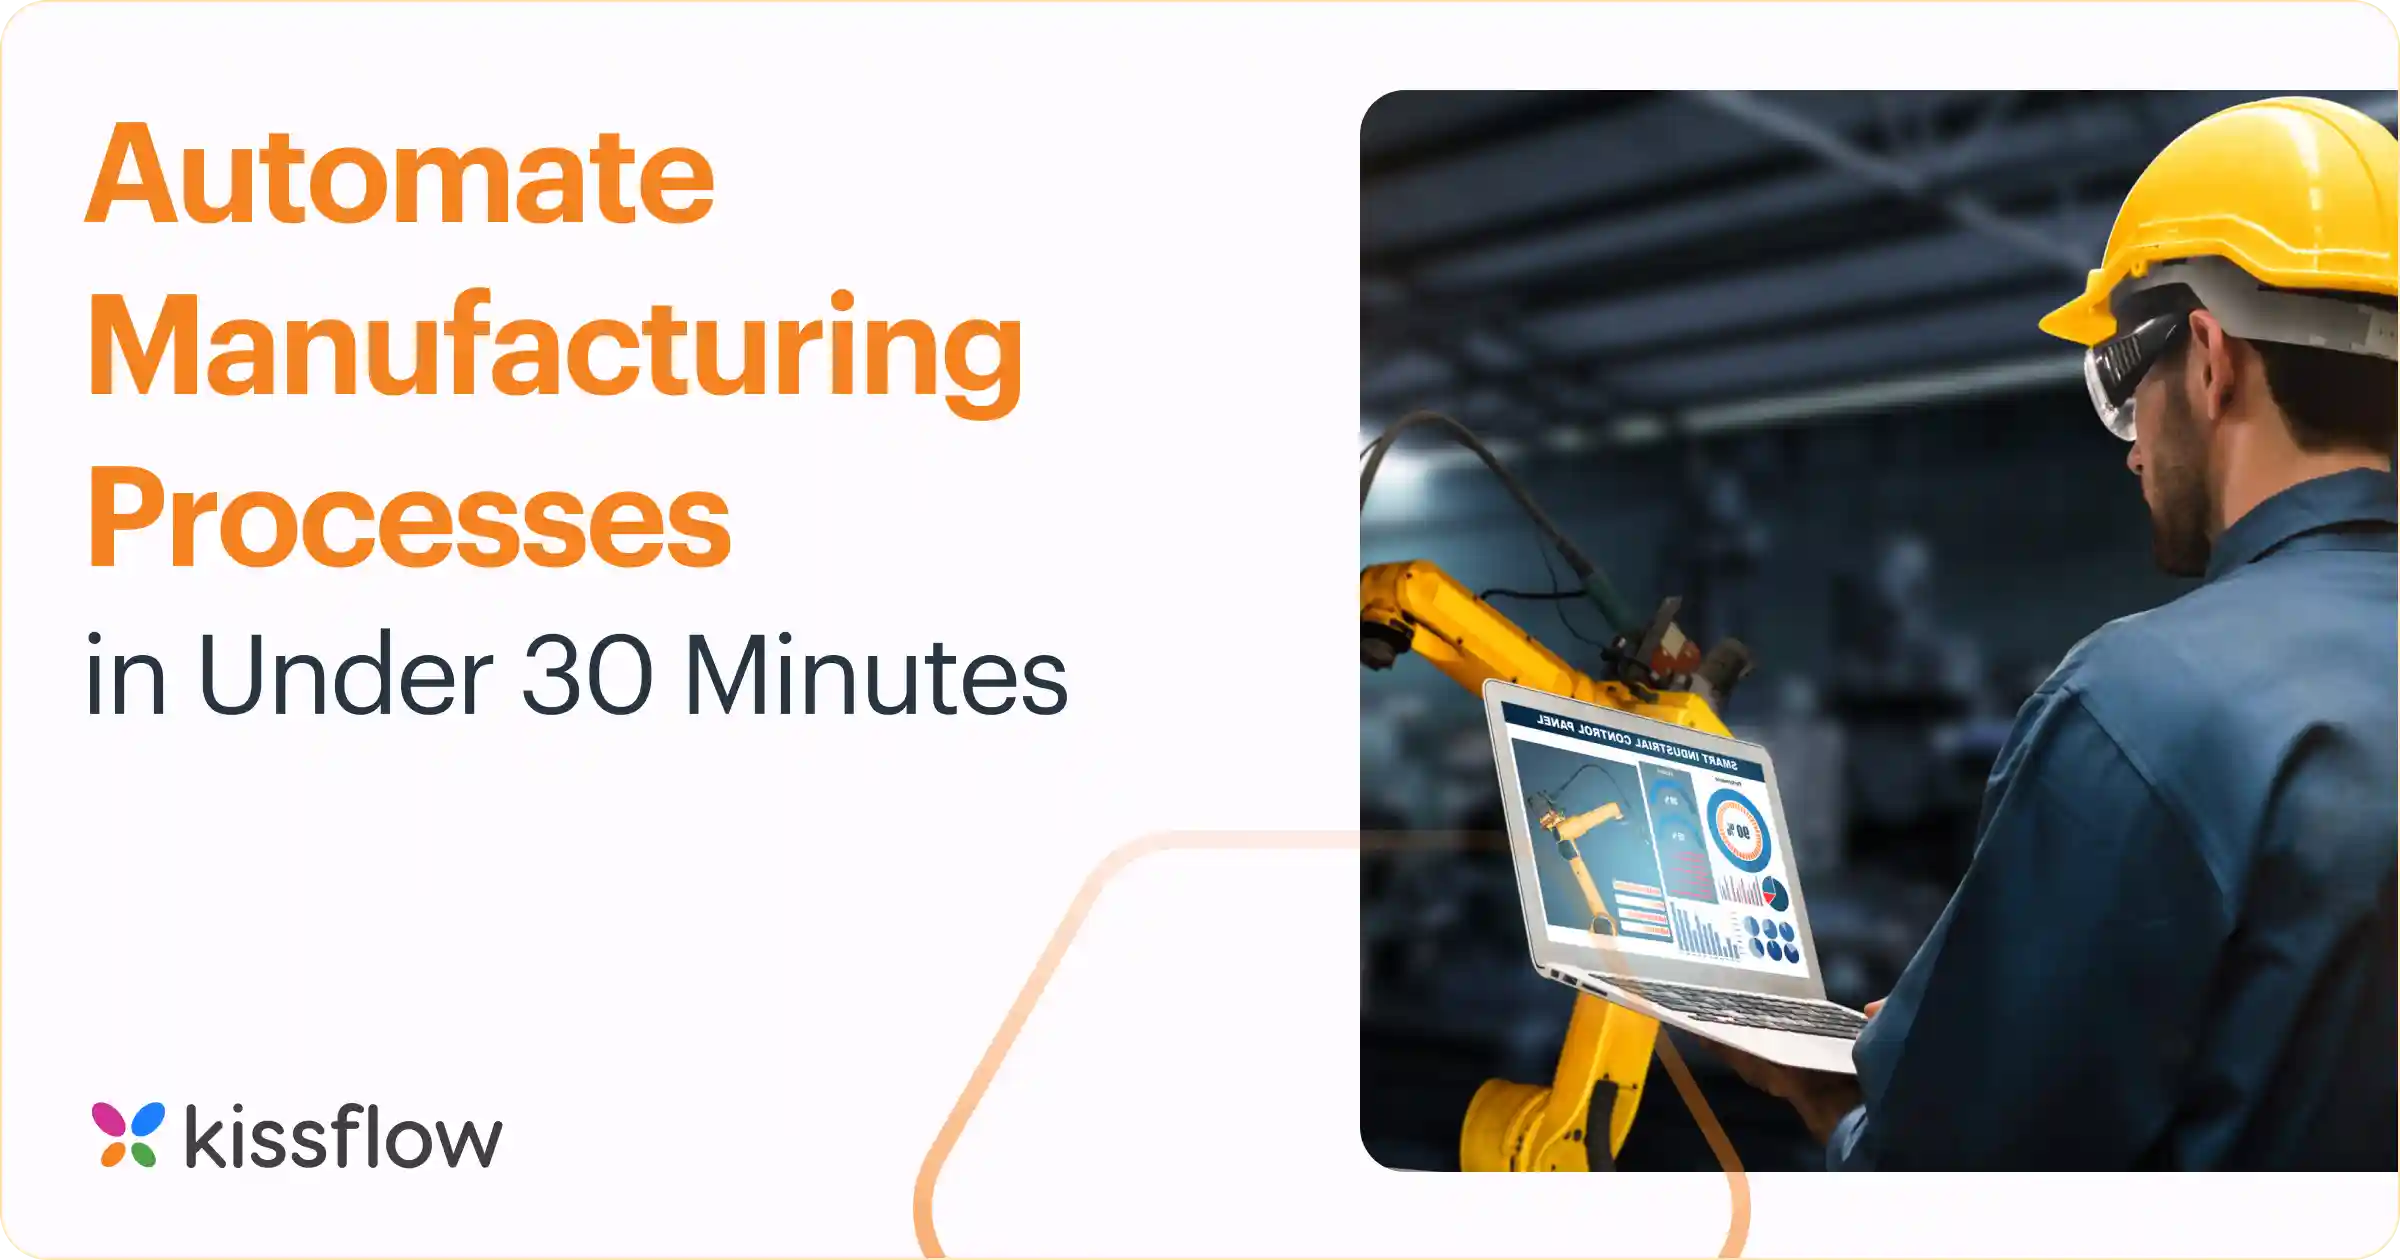 Automate Manufacturing Processes in under 30 minutes